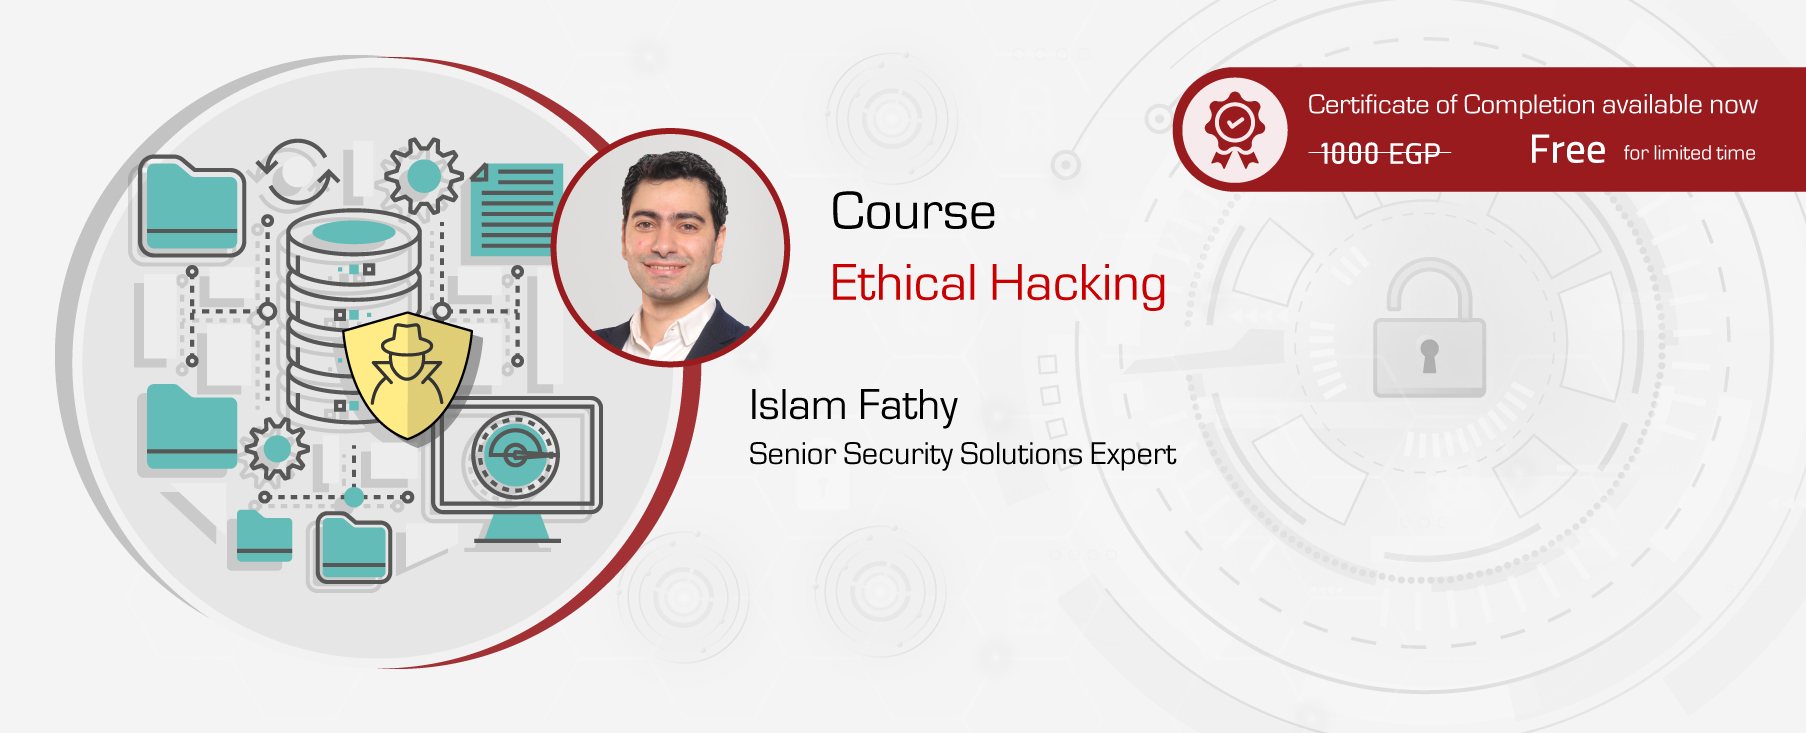 Course: Ethical Hacking